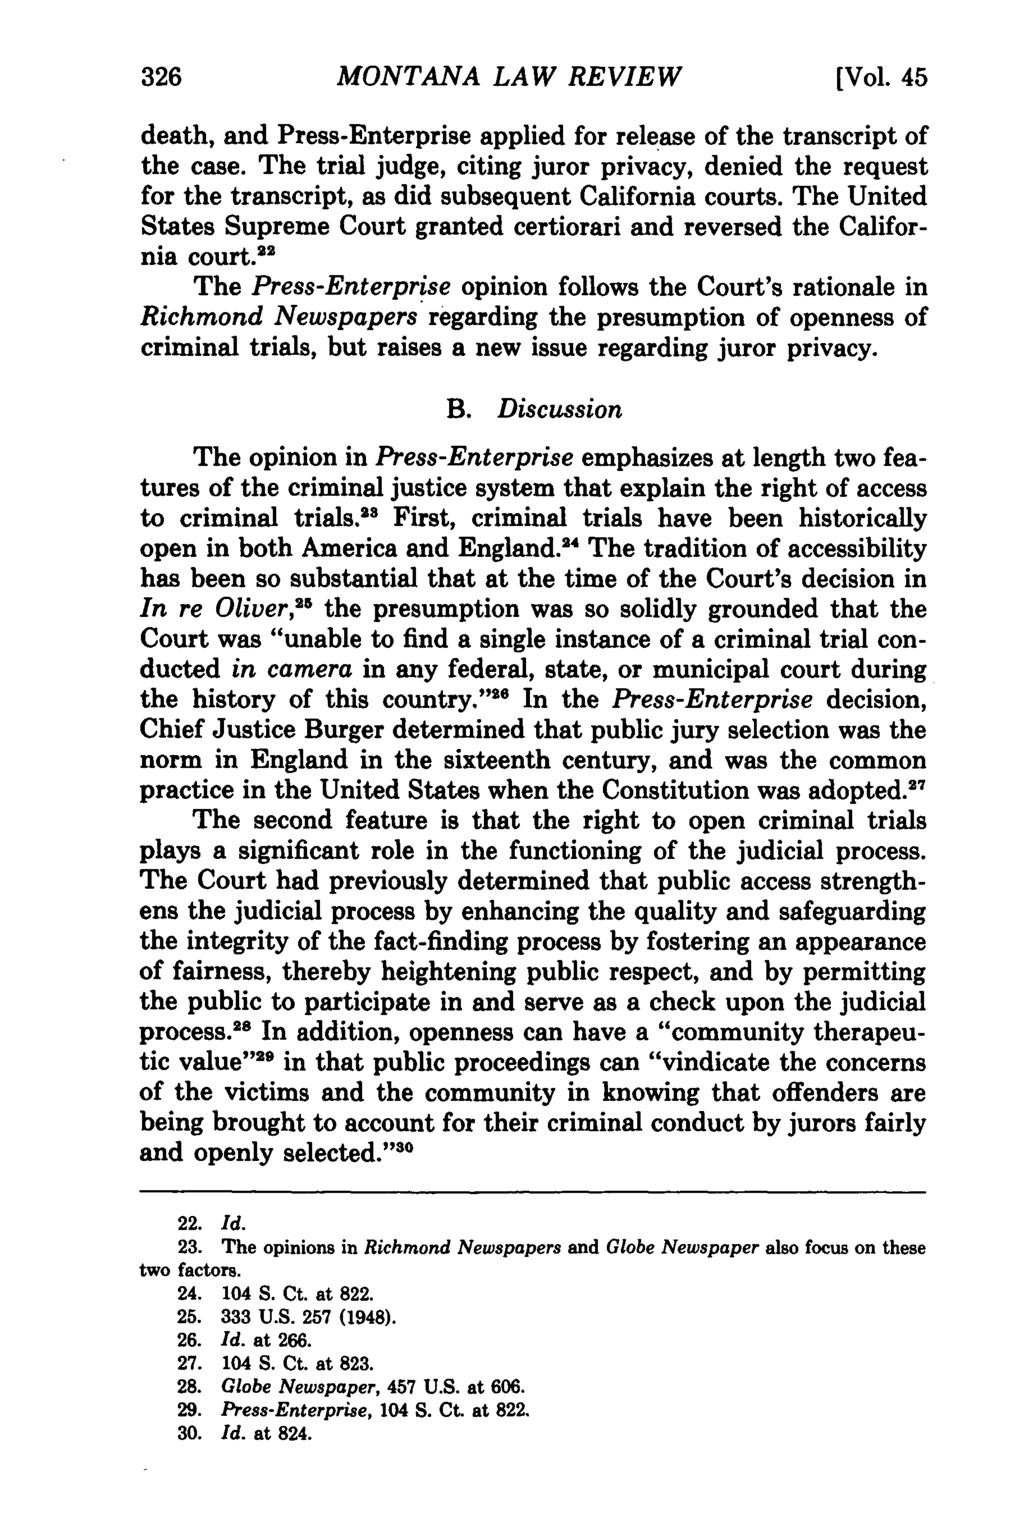 326 Montana Law Review, Vol. 45 [1984], Iss. 2, Art. 7 MONTANA LAW REVIEW [Vol. 45 death, and Press-Enterprise applied for release of the transcript of the case.